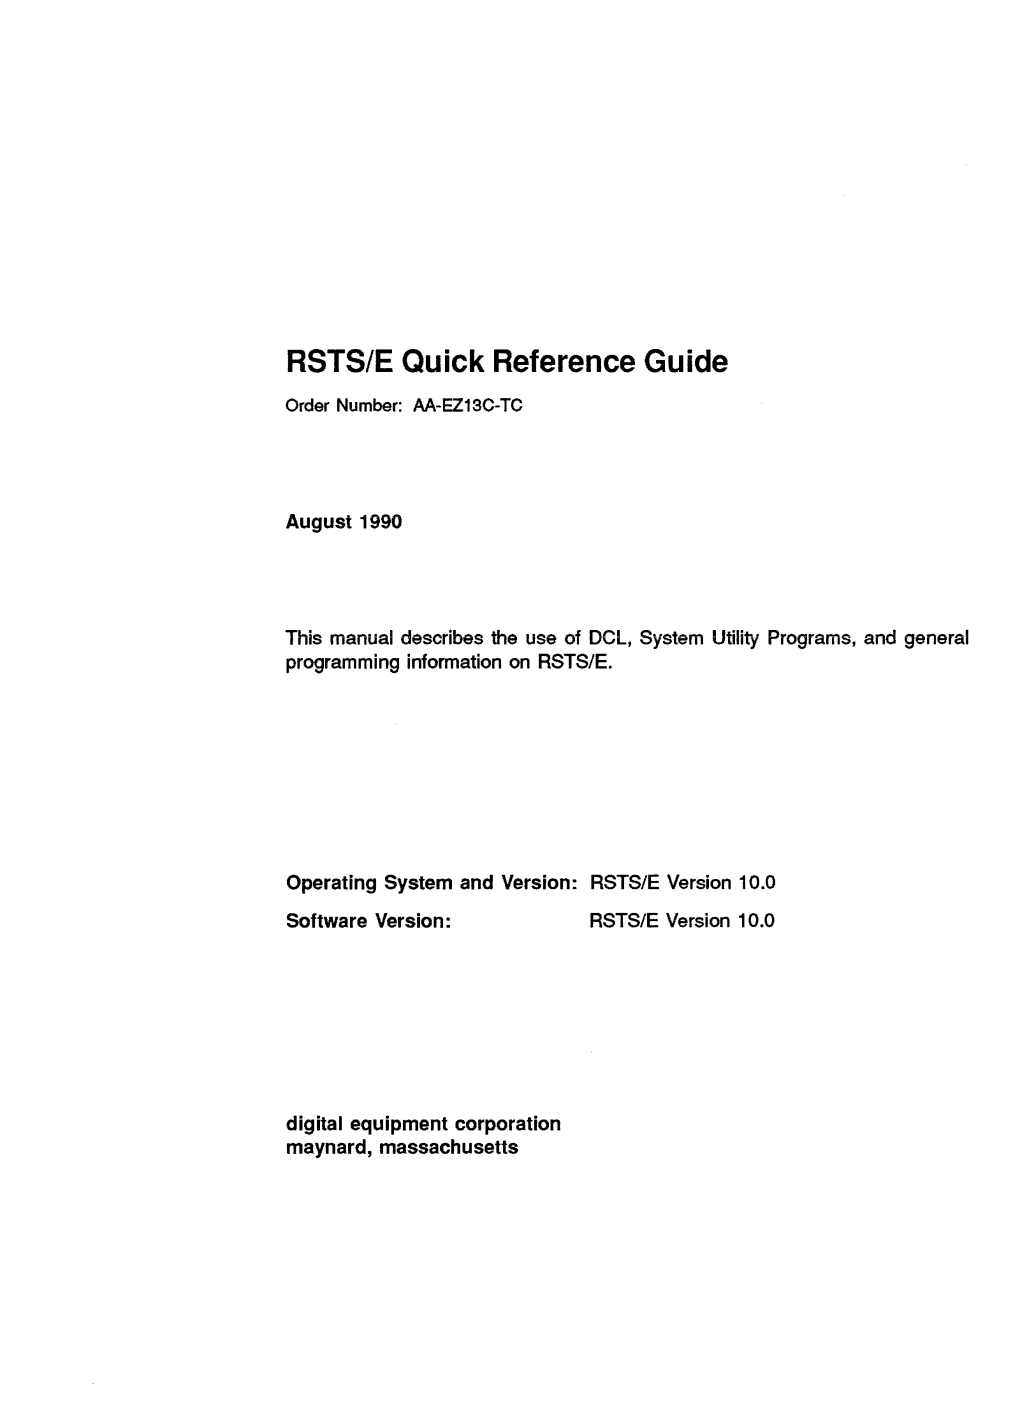 RSTS/E Quick Reference Guide